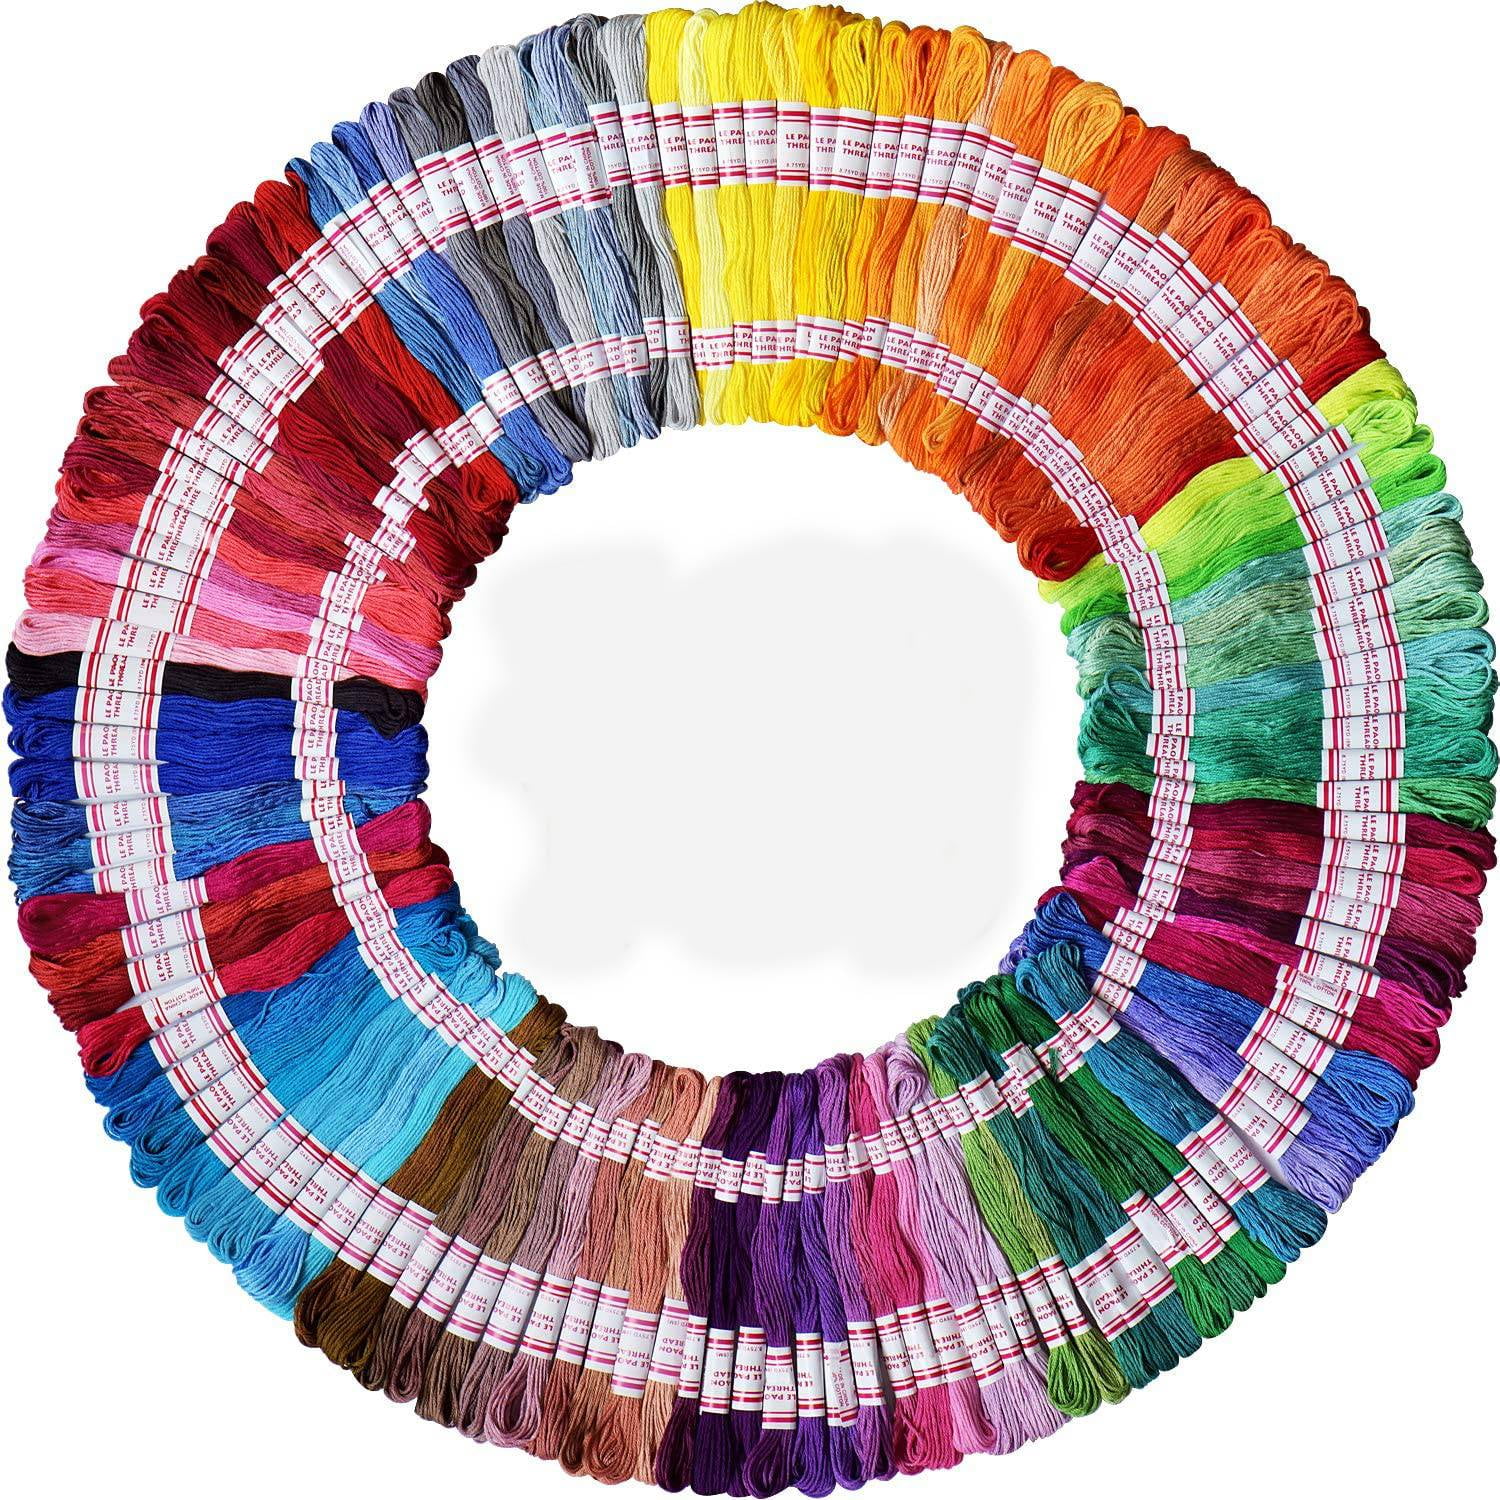 MOYYON 122 skeins Embroidery Floss - Embroidery Thread - Friendship  Bracelet String for Cross Stitch, Hand Embroidery, String Art